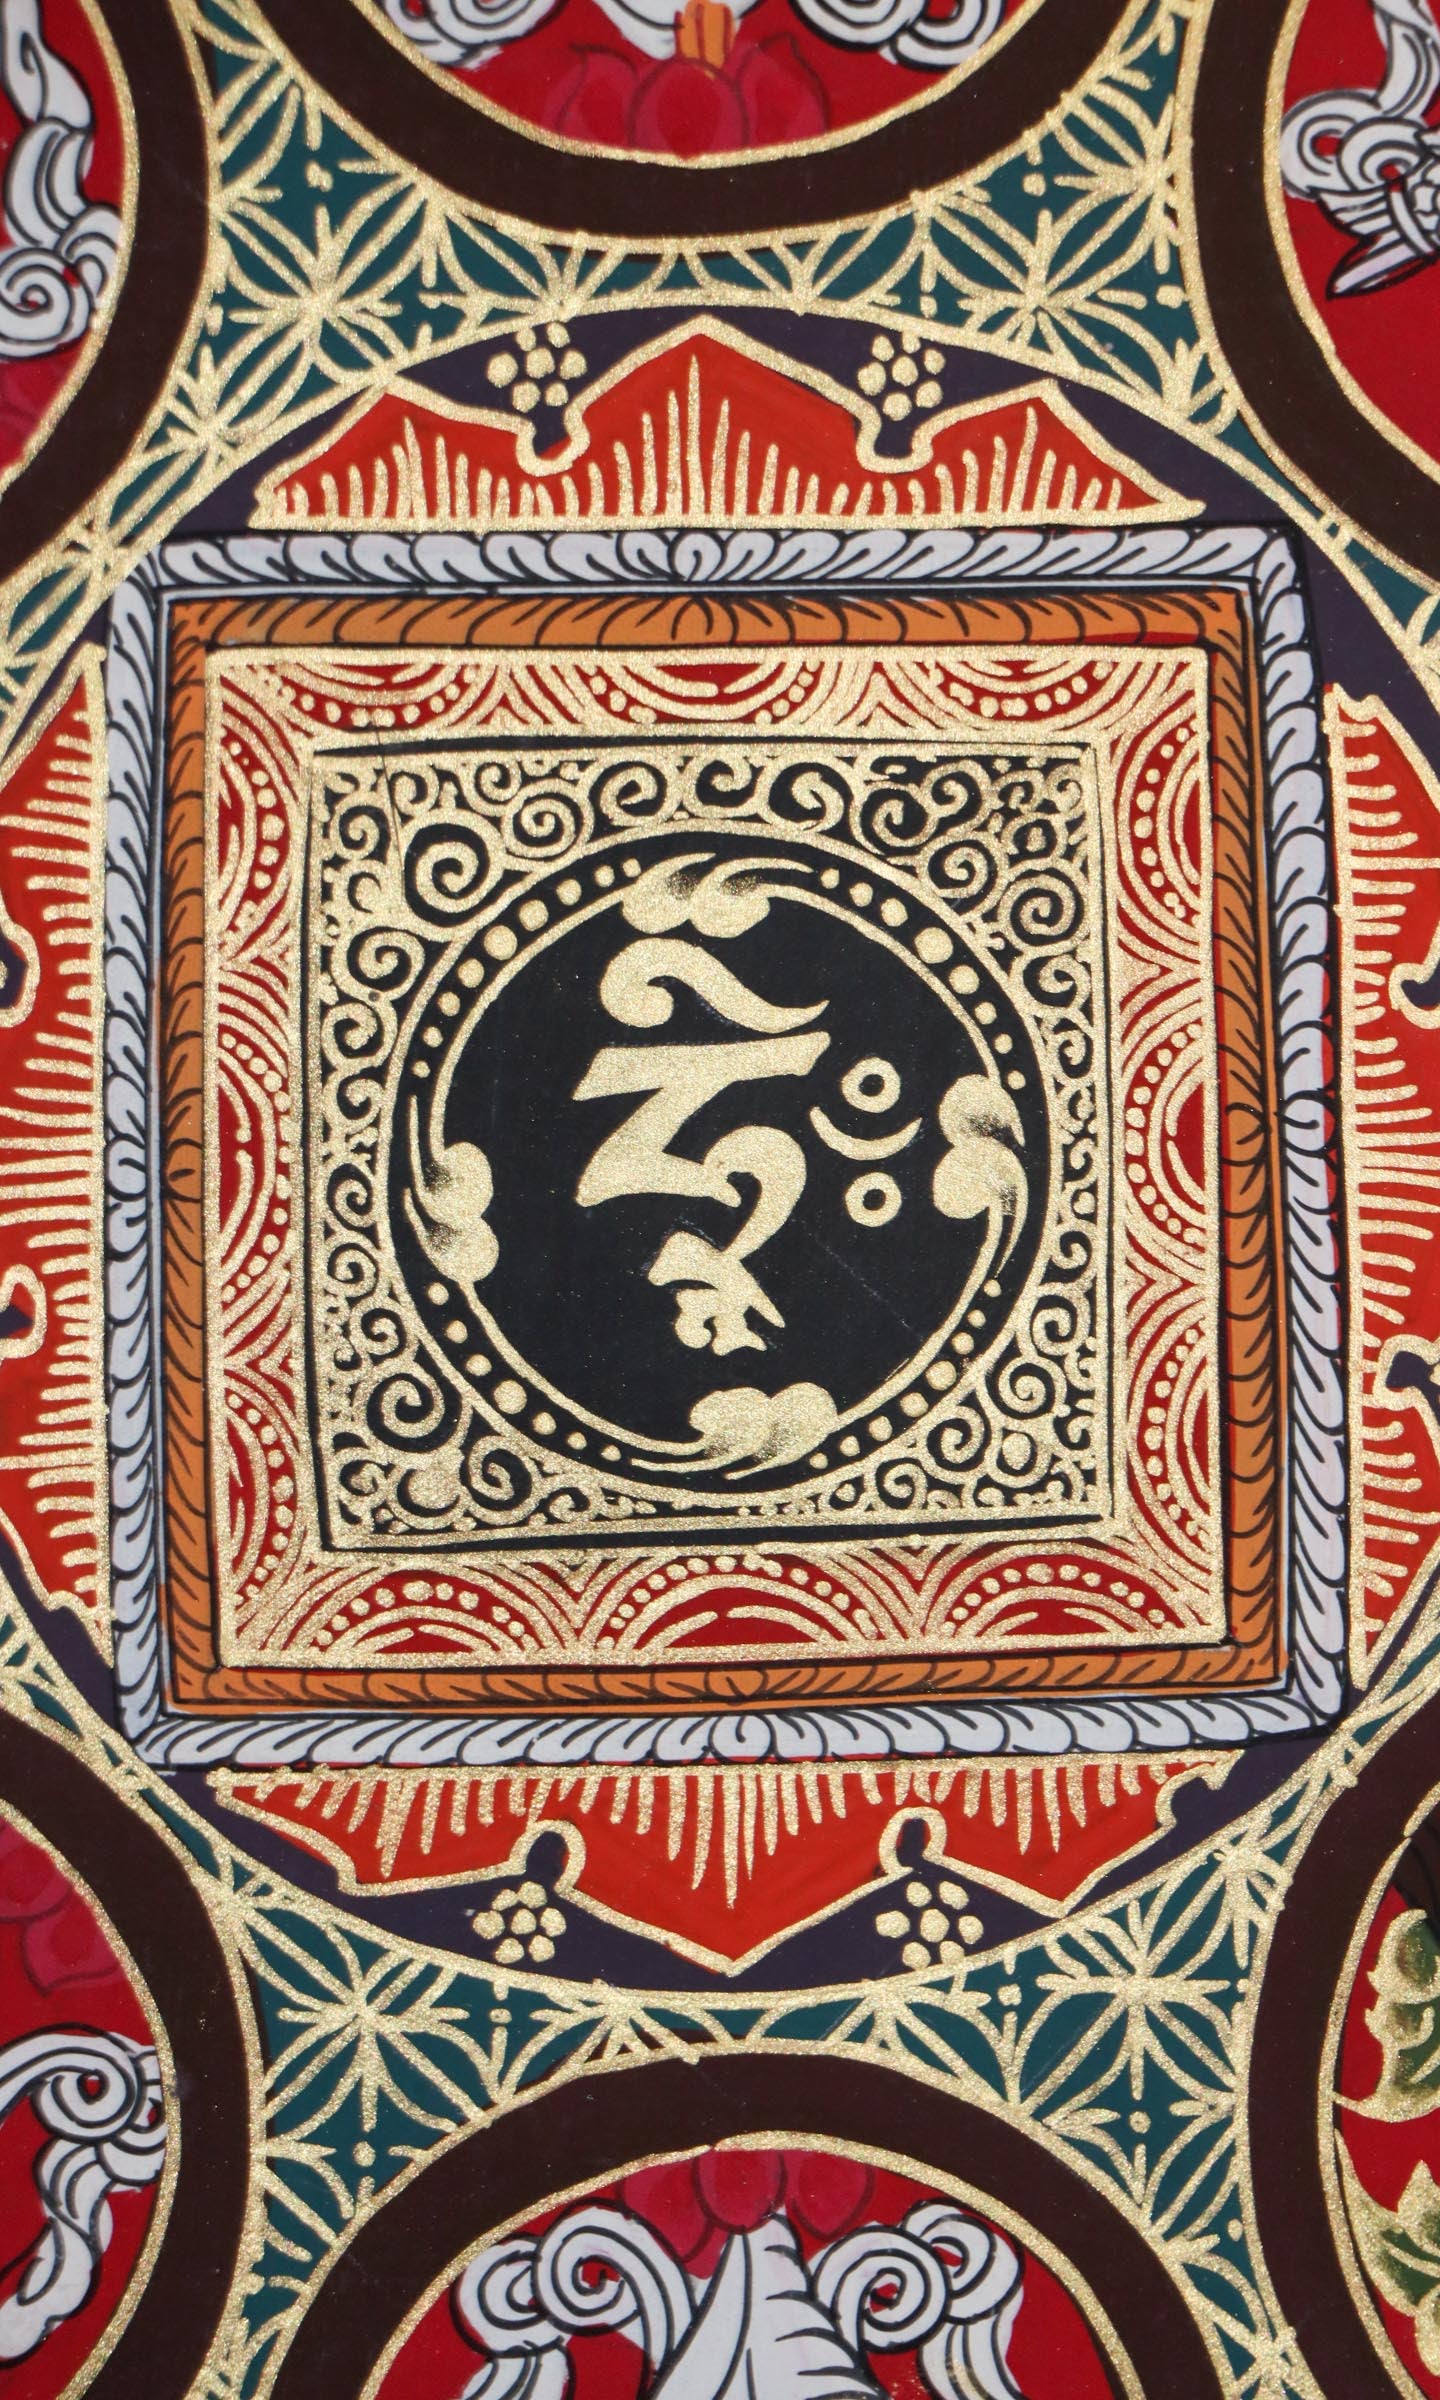 Handpainted black and gold Thangka painting.